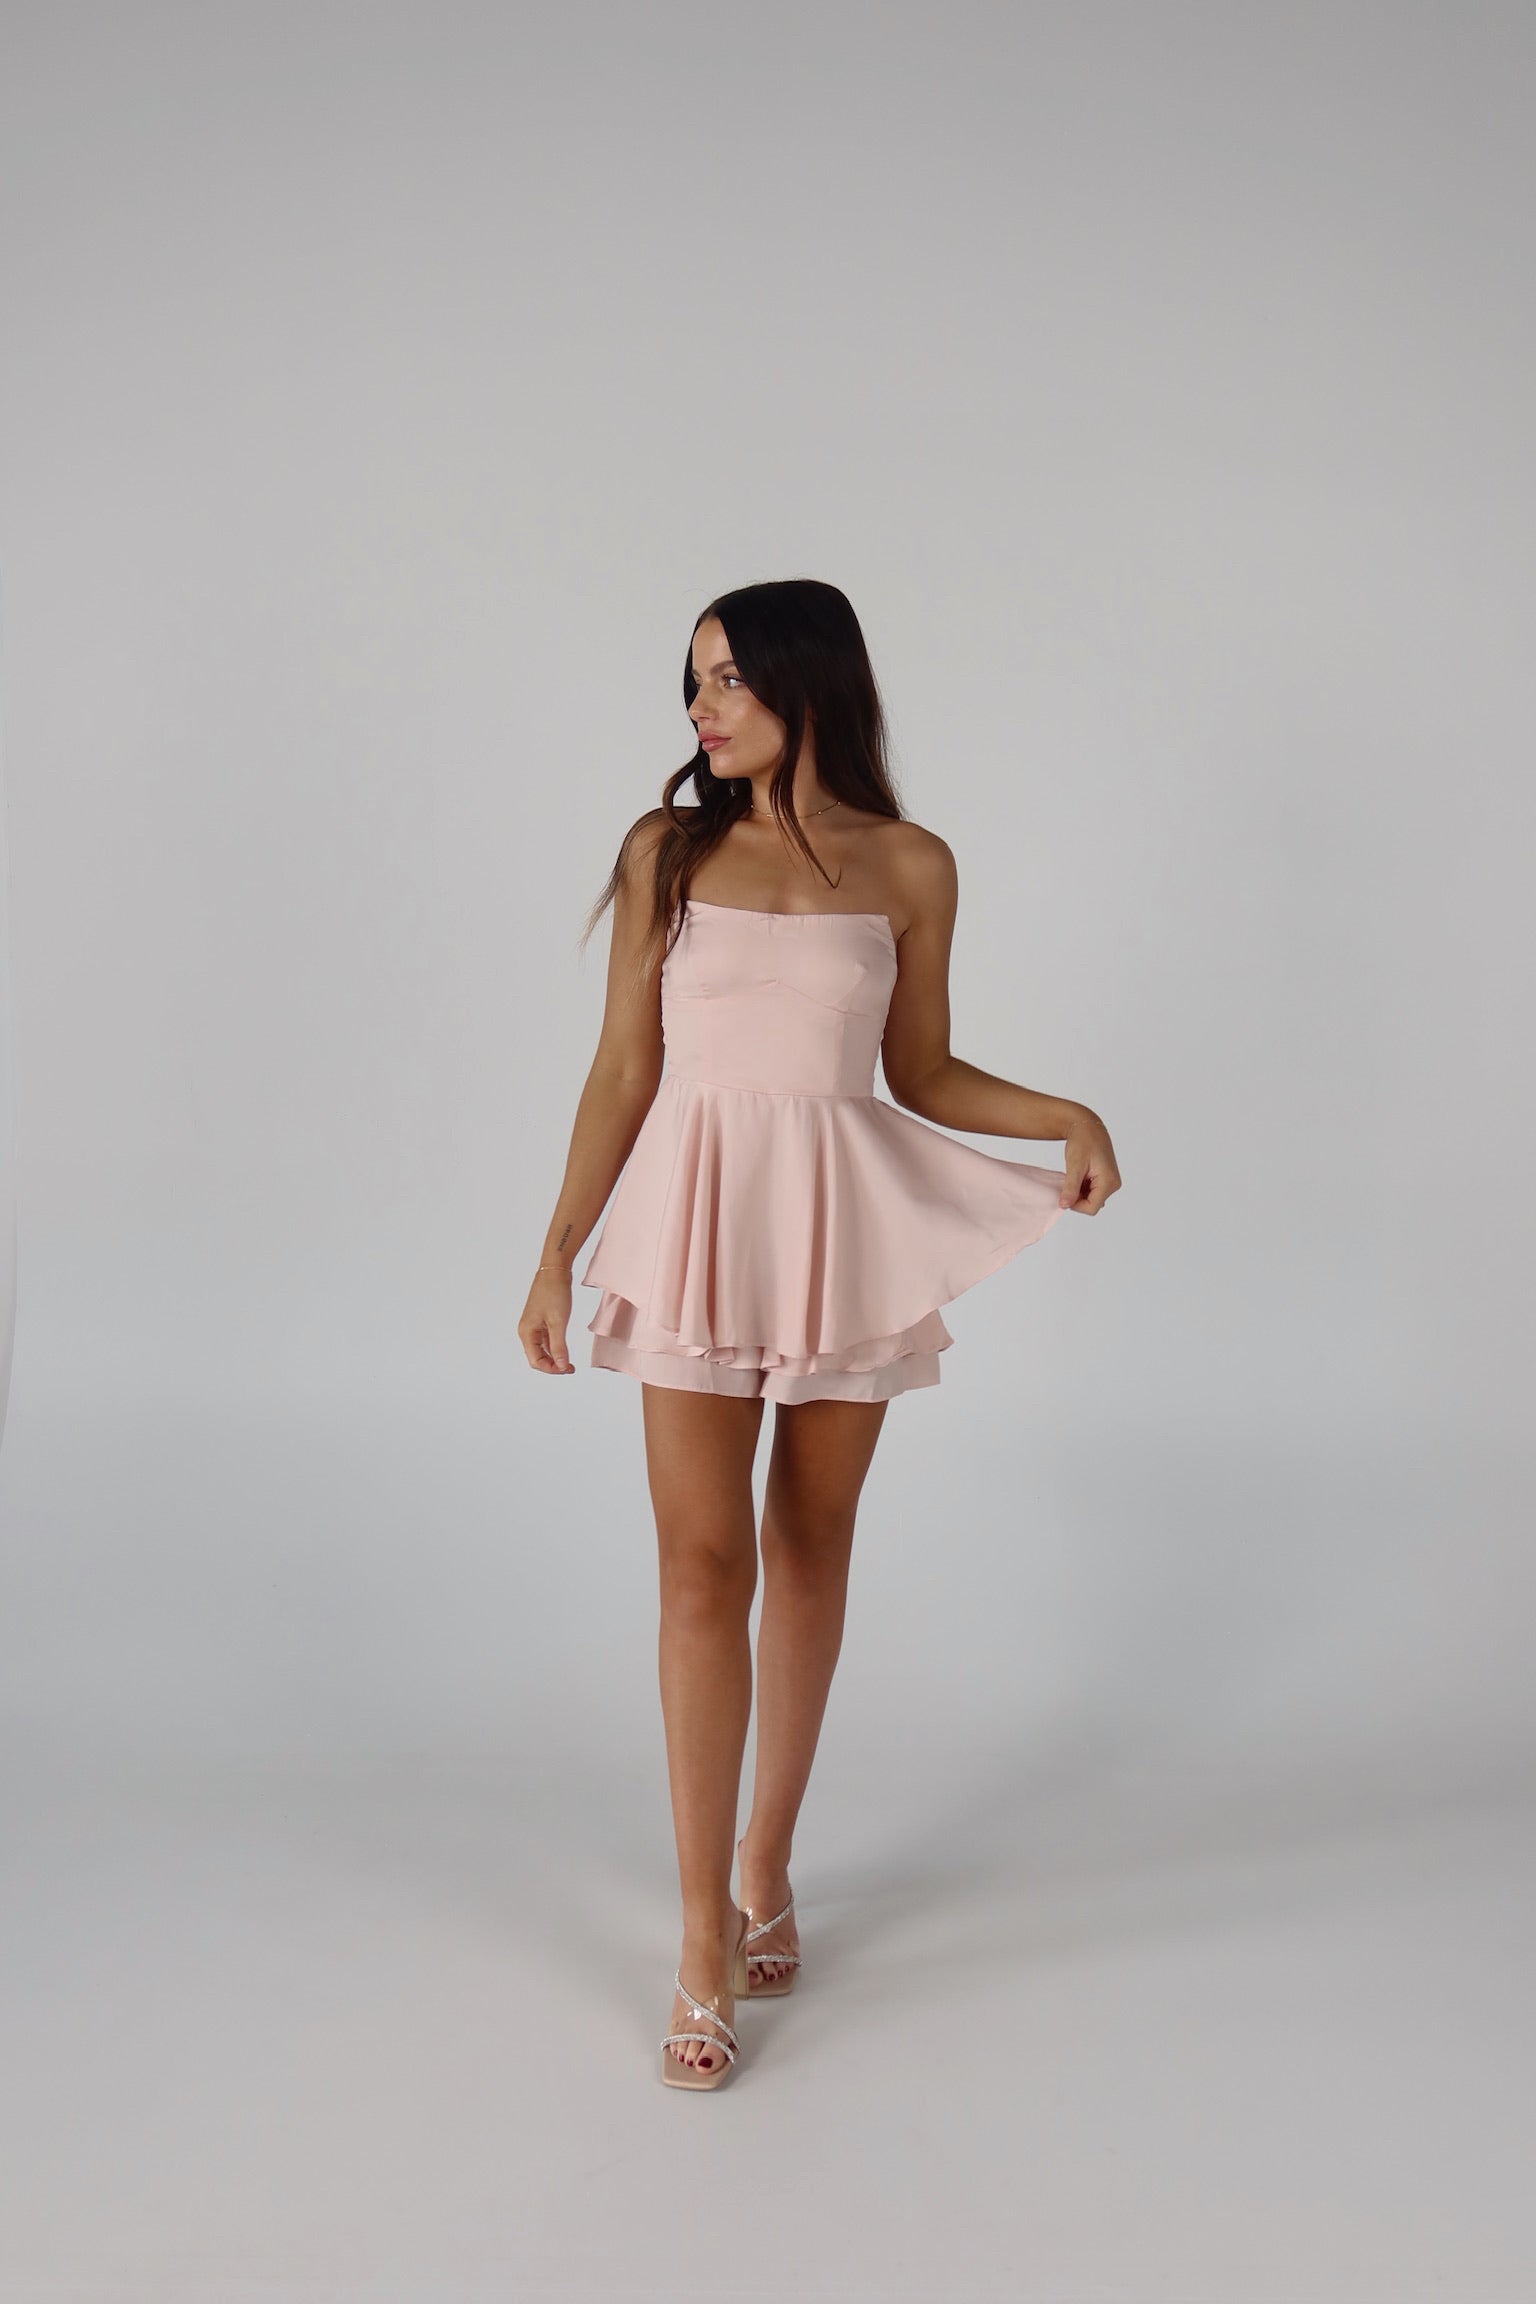 SALE :Shelby Baby Pink Romper